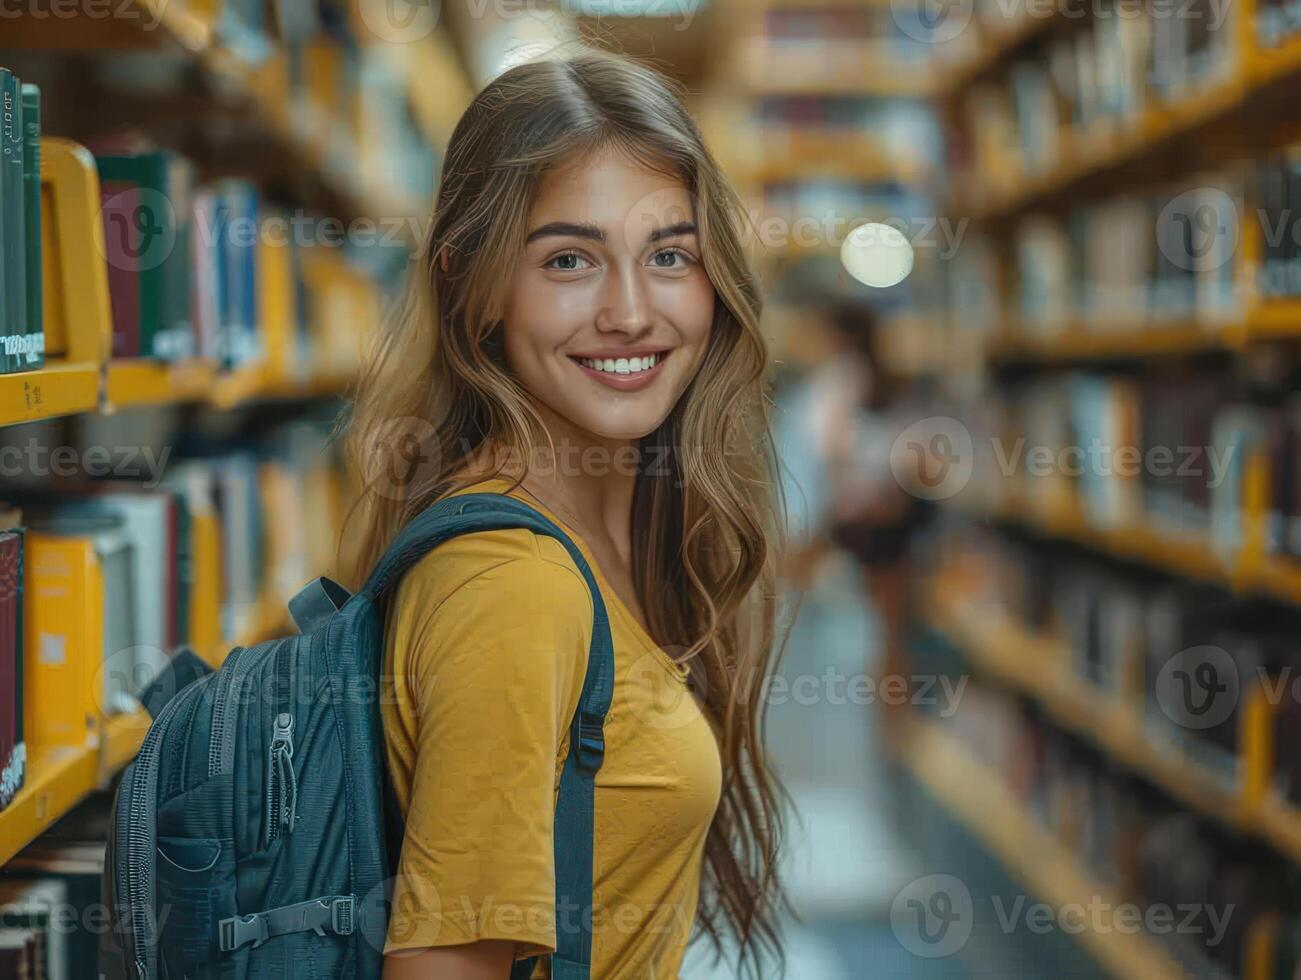 A woman with a backpack standing amidst shelves filled with books in a library photo